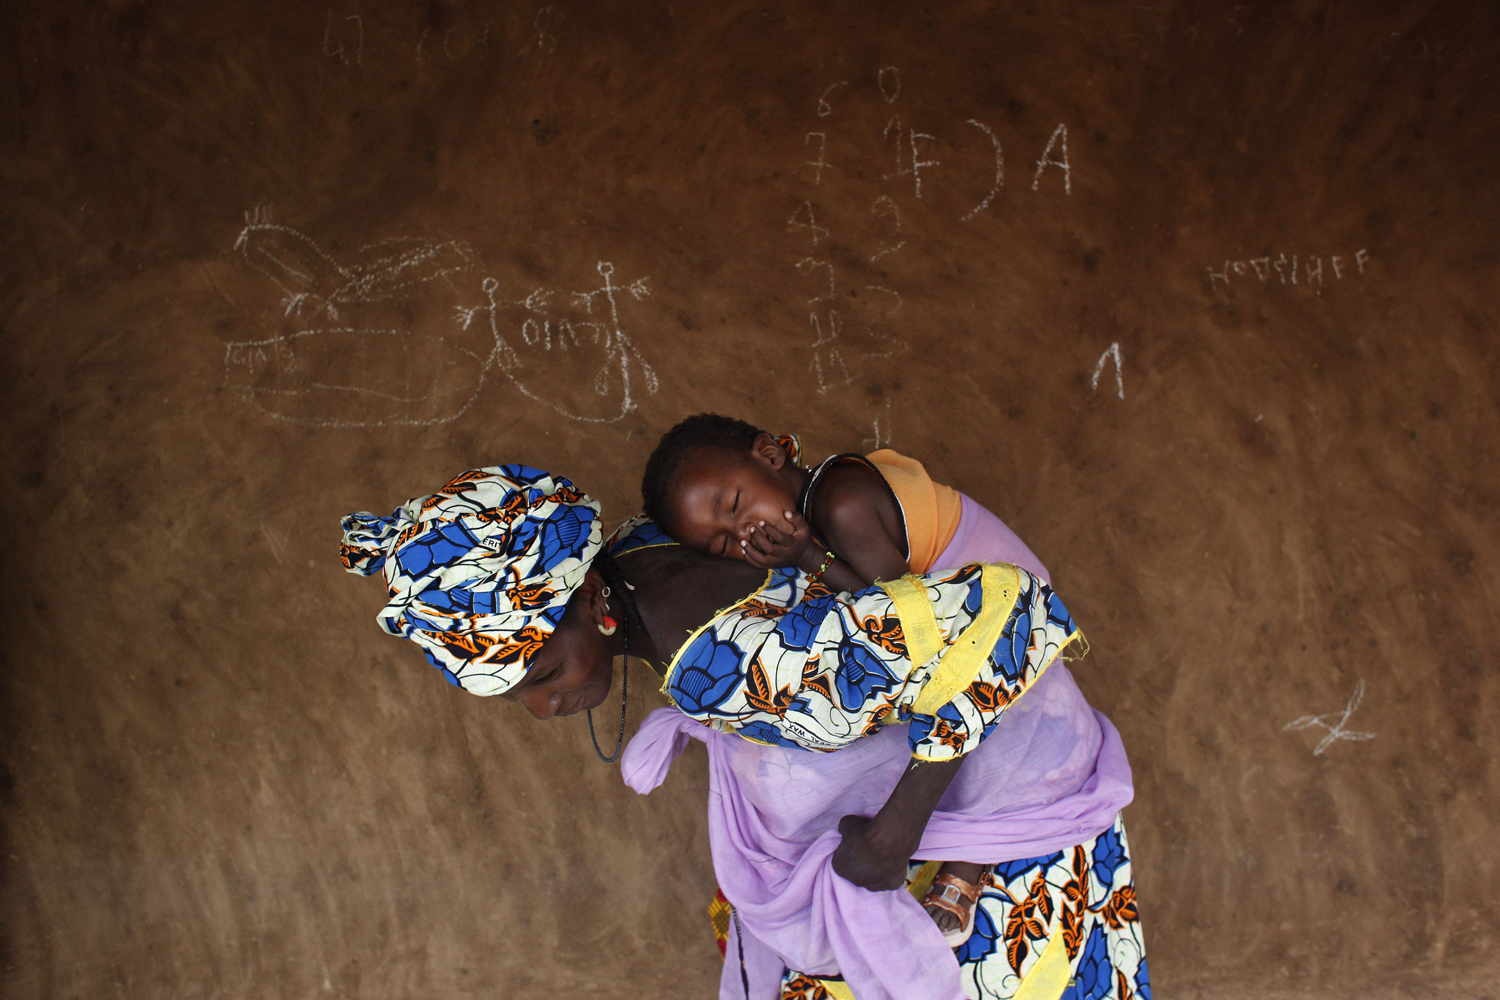 June 3, 2012. A woman wraps her sleeping baby on her back after a talk with members of the Spanish NGO Accion Contra el Hambre (Action Against Hunger) about good sanitation and hygiene practices in Niomel, Mauritania.